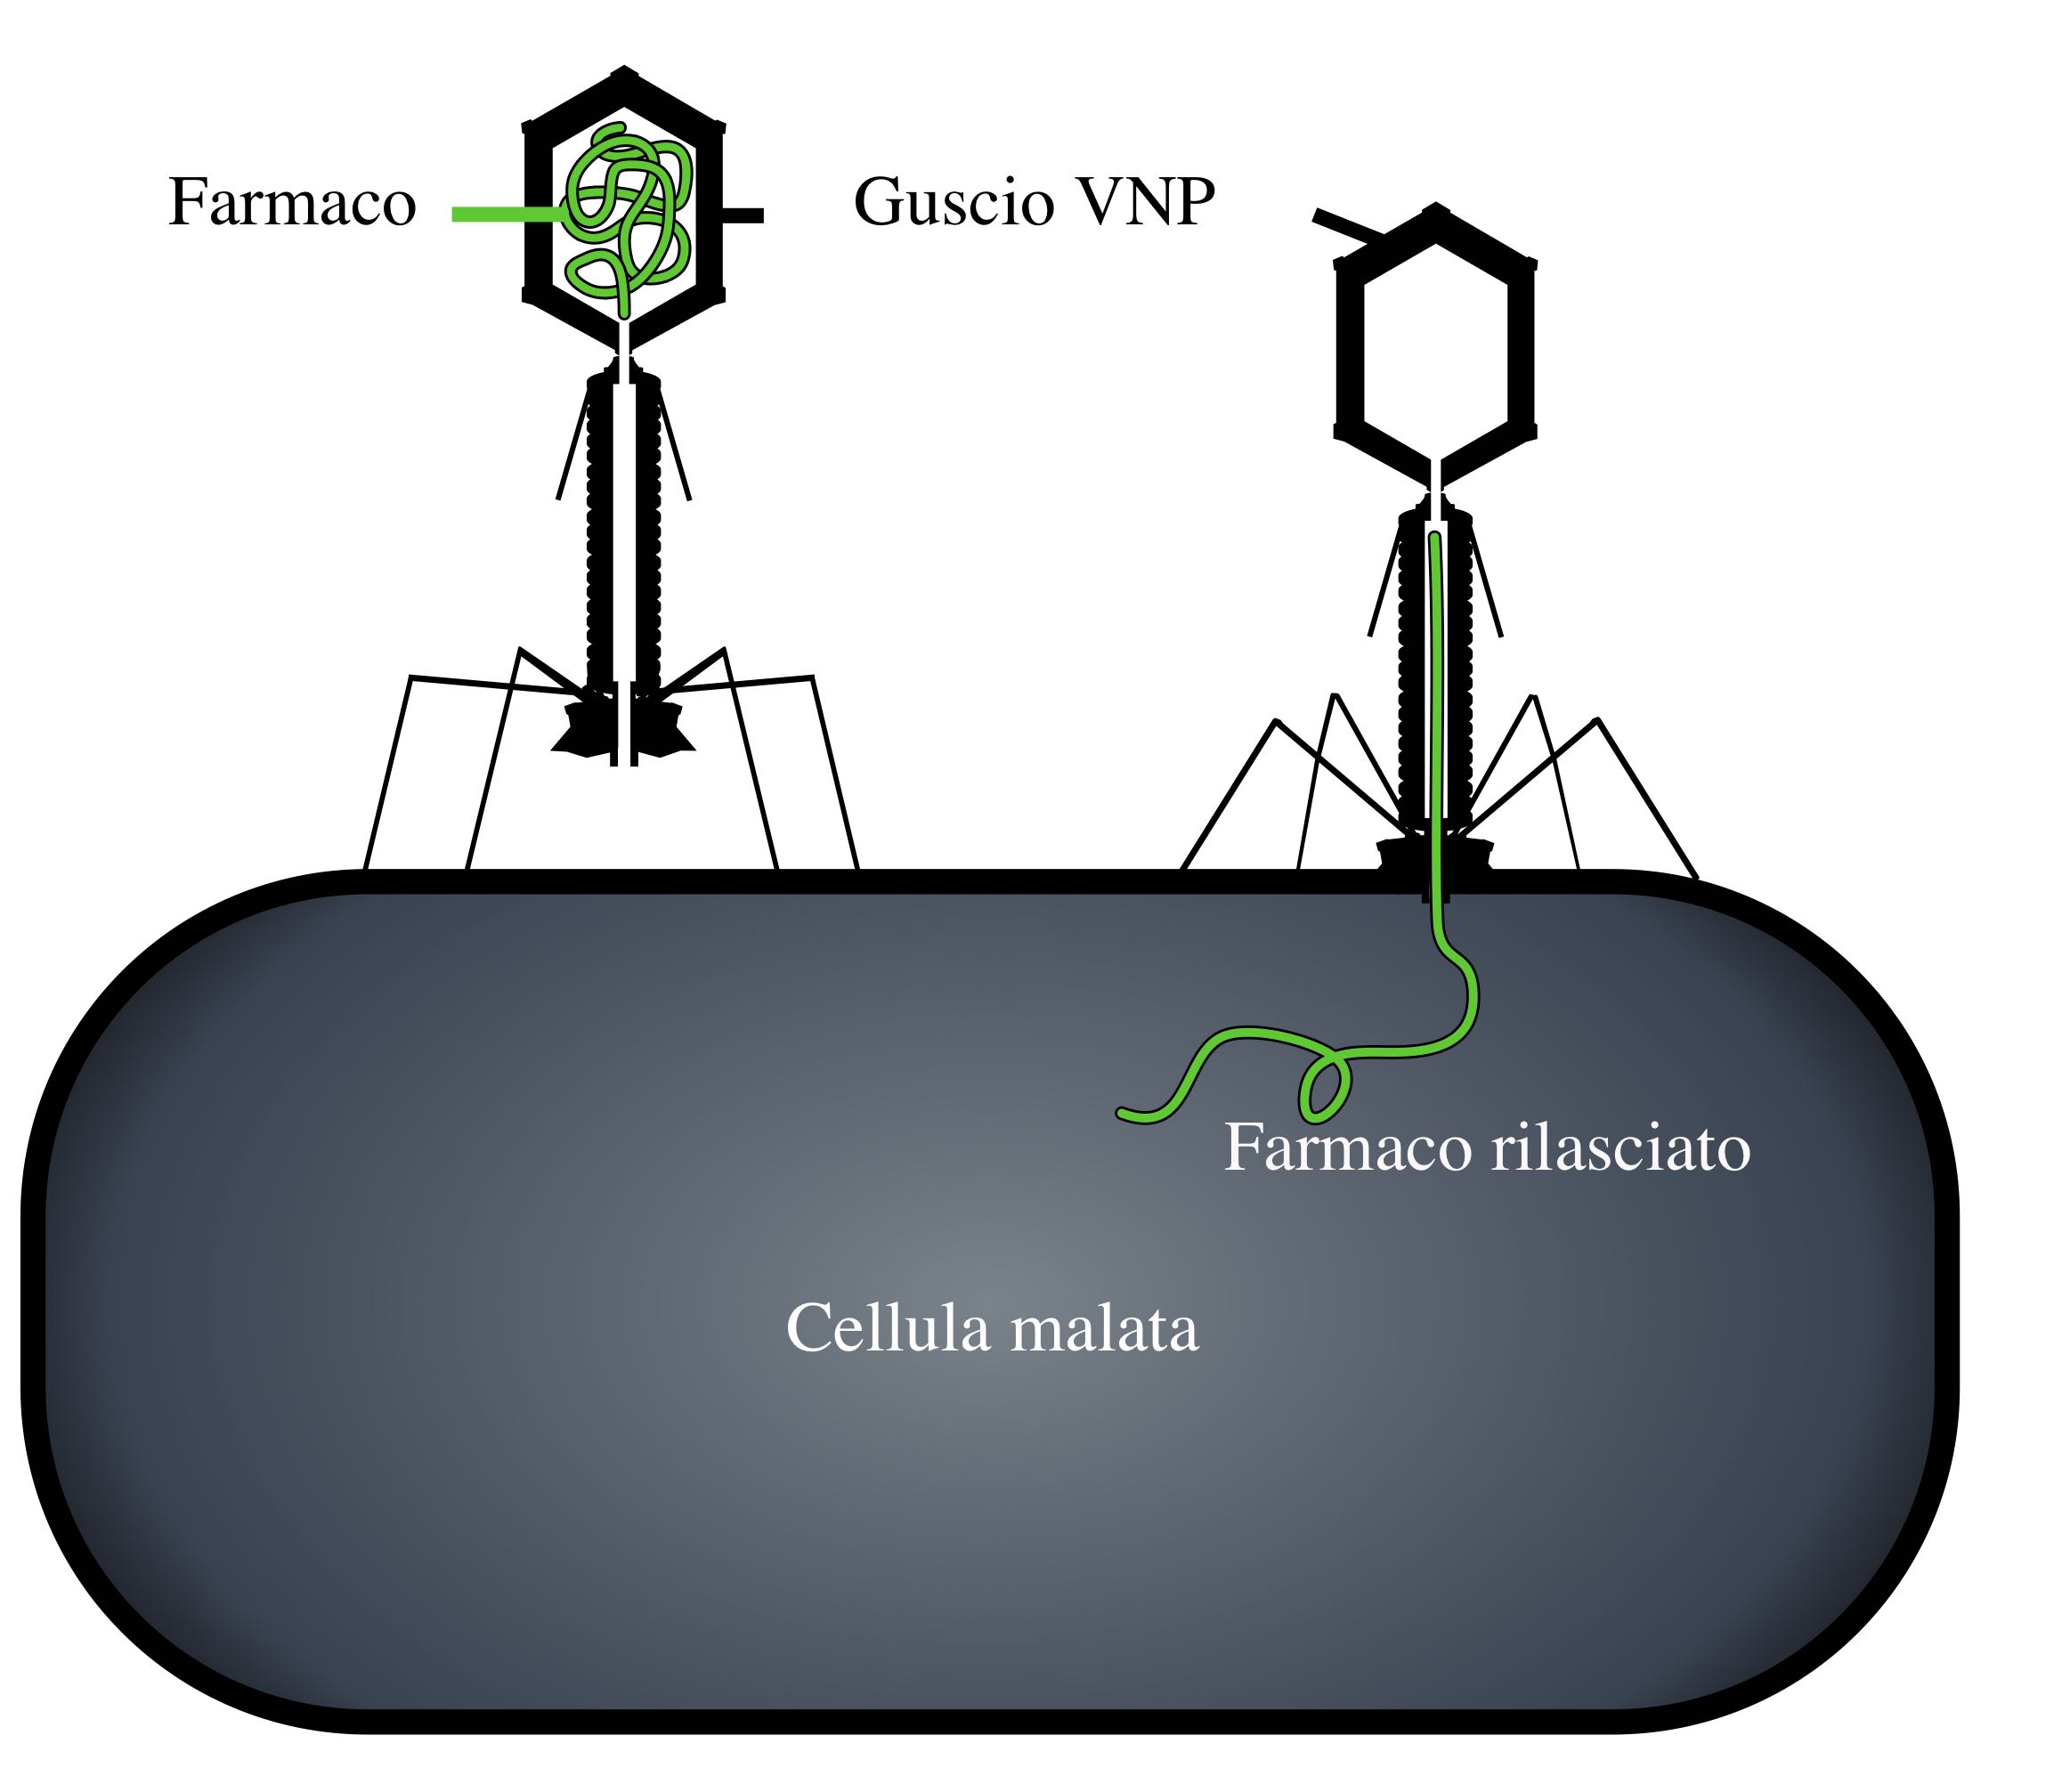 Figura 1By phage: Modified from Adenosine, bacteria + composition: Thomas Splettstoesser (www.scistyle.com) - Own work, CC BY-SA  3.0, https://commons.wikimedia.org/w/index.php?curid=20351670